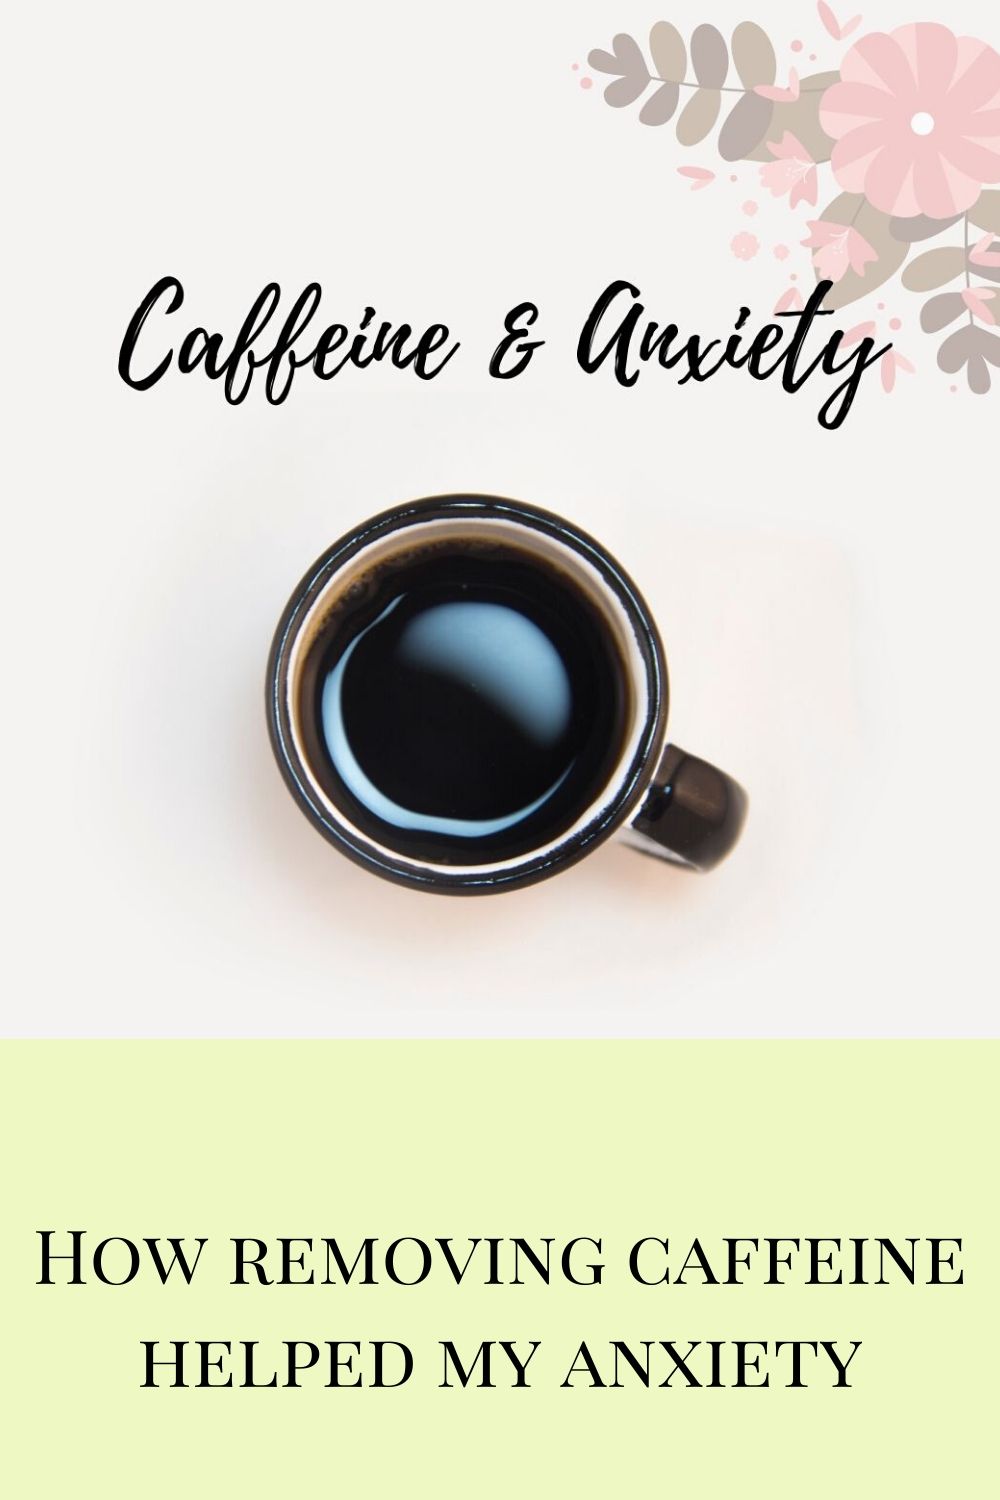 How to Manage Anxiety by Removing Caffeine